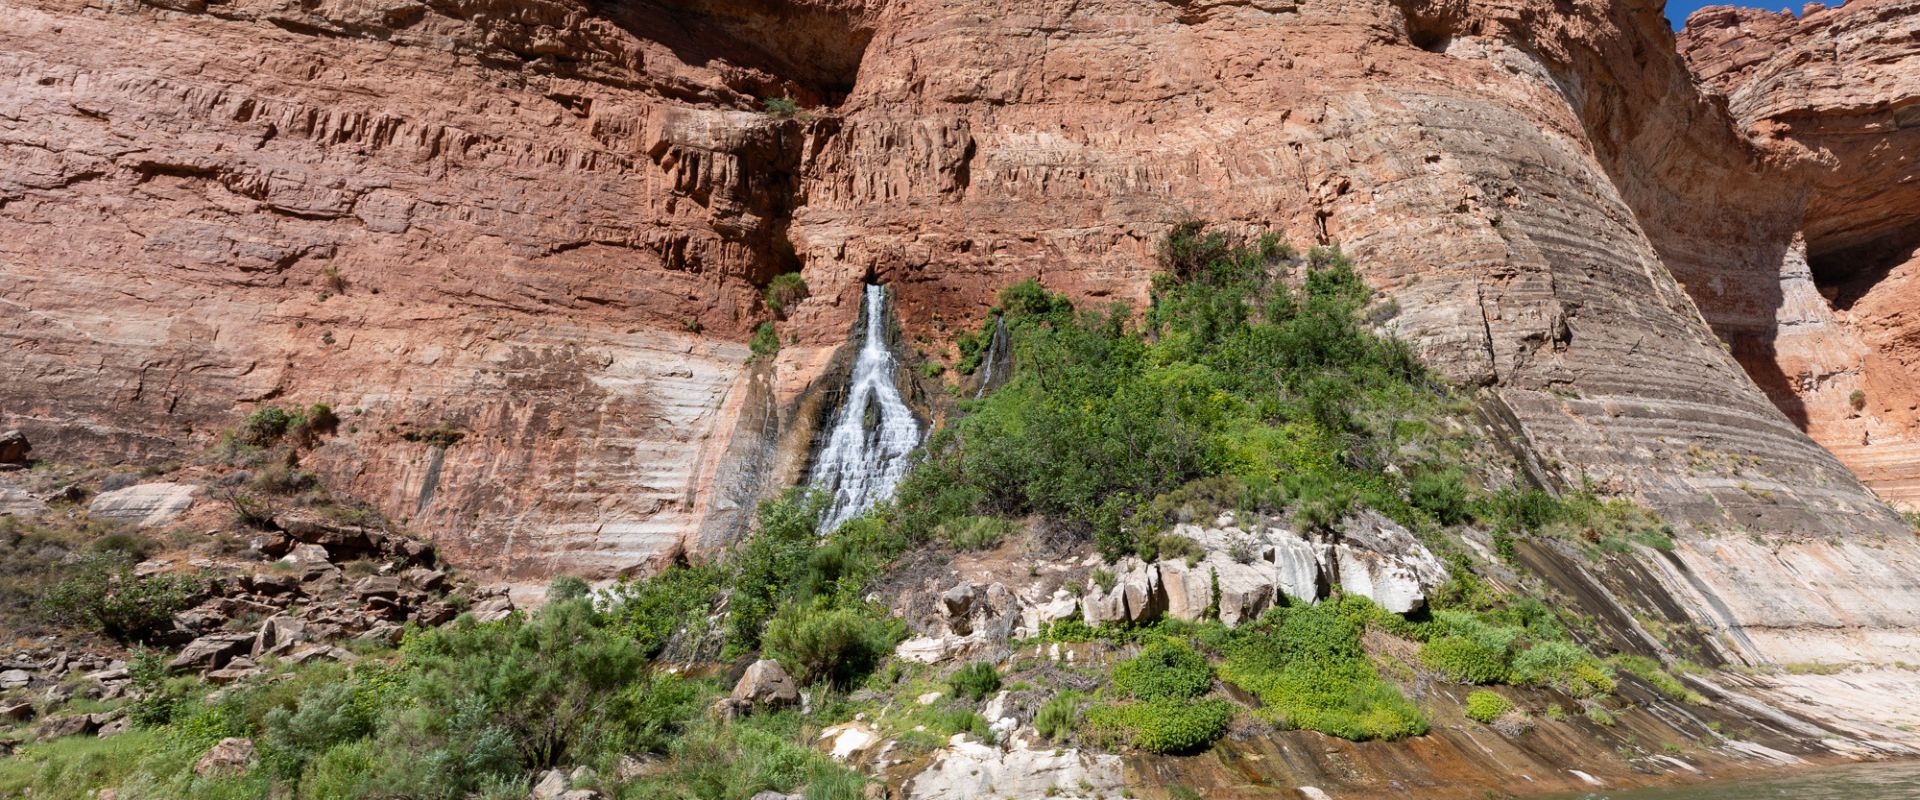 Vasey's Paradise is a lush spring coming out of the cliff about halfway between rim and river in Grand Canyon